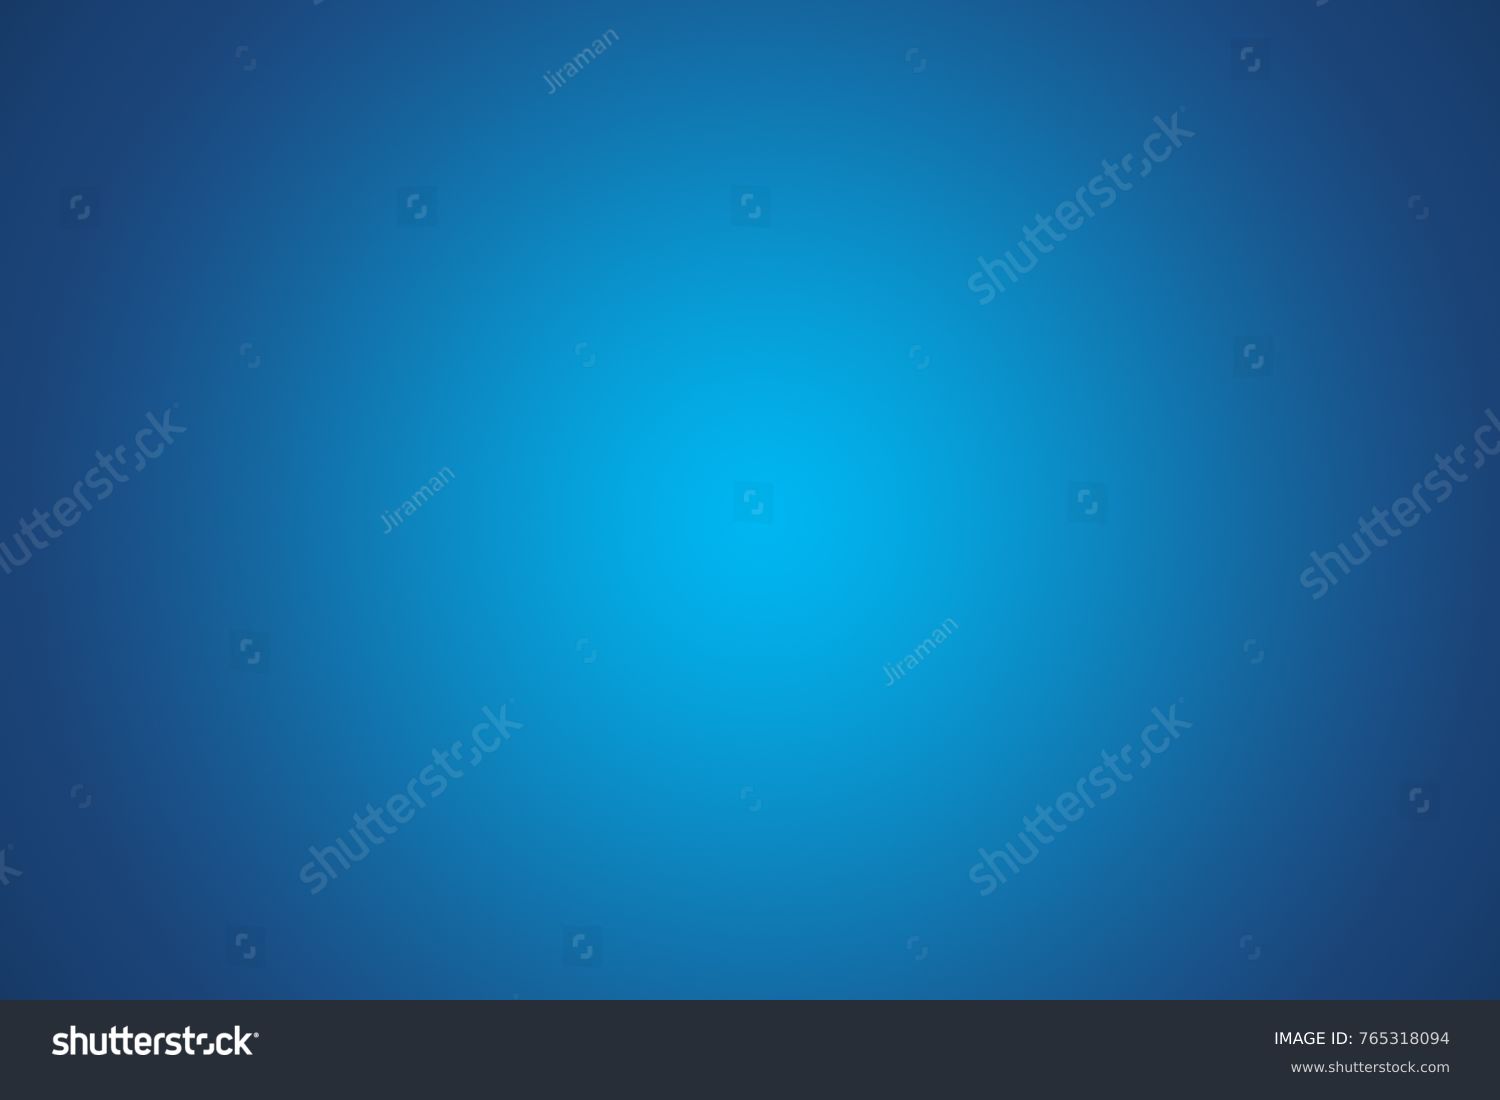 Blue gradient abstract background #765318094